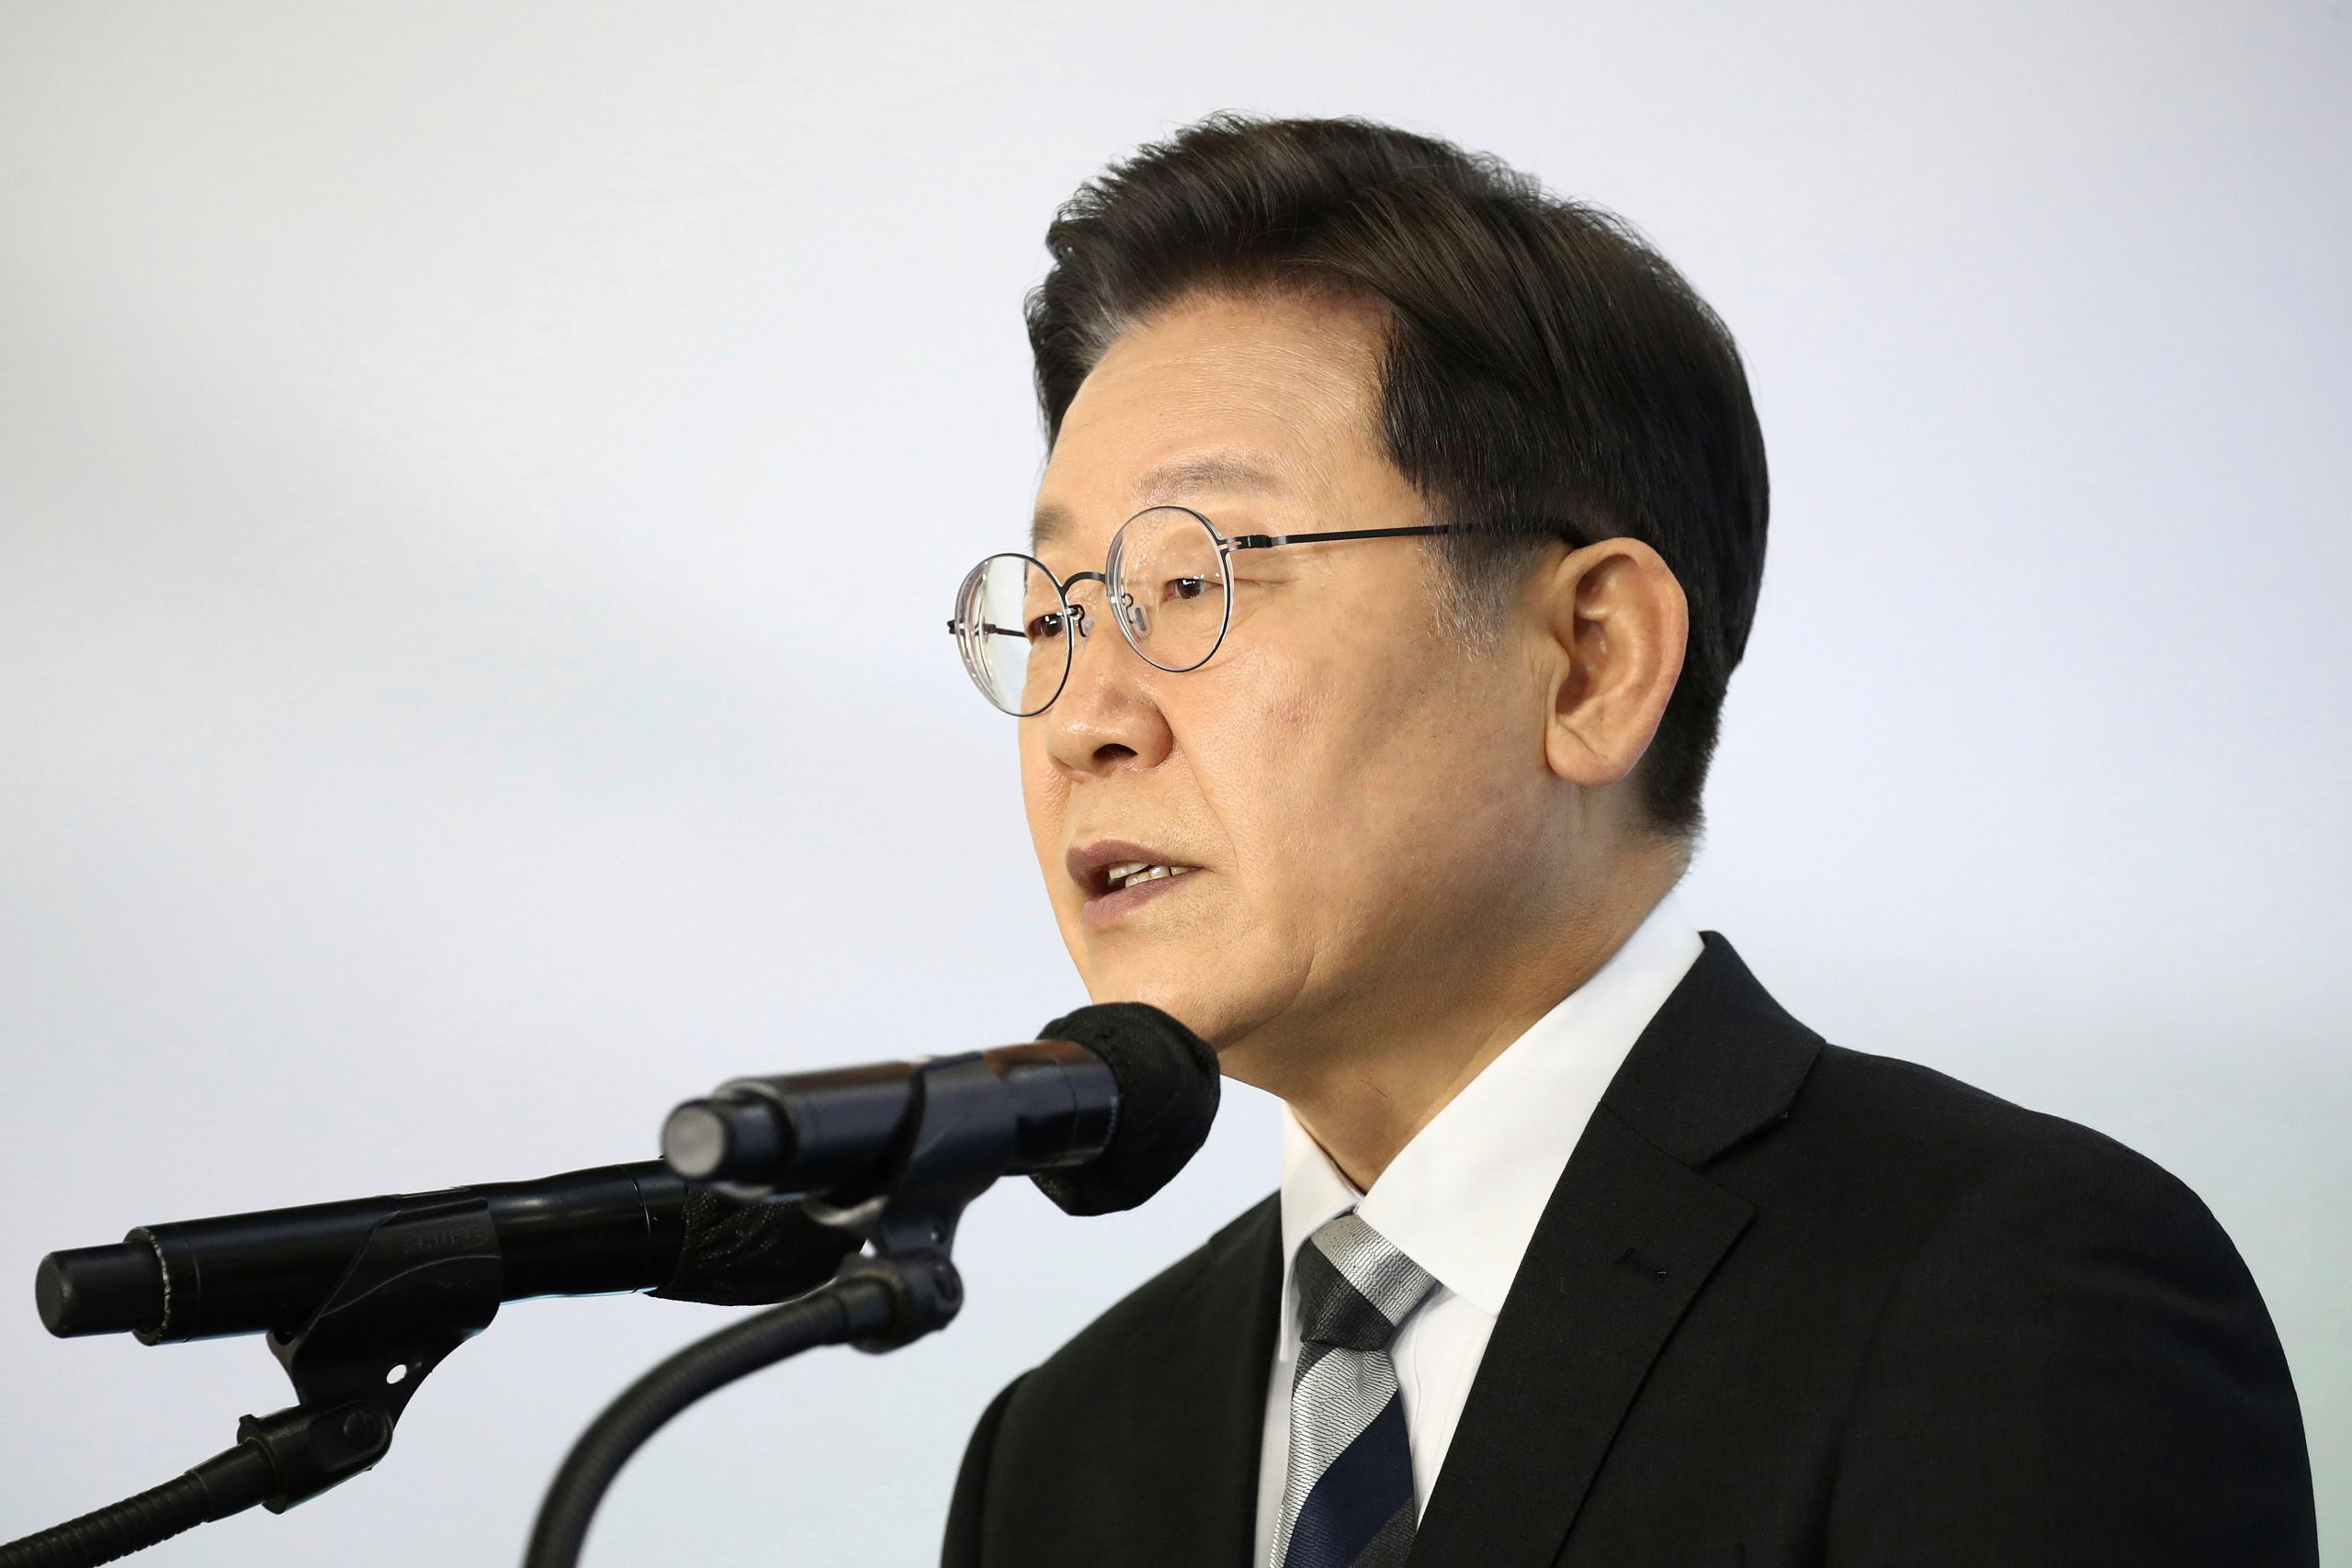 Hair loss emerges as new election issue in South Korea